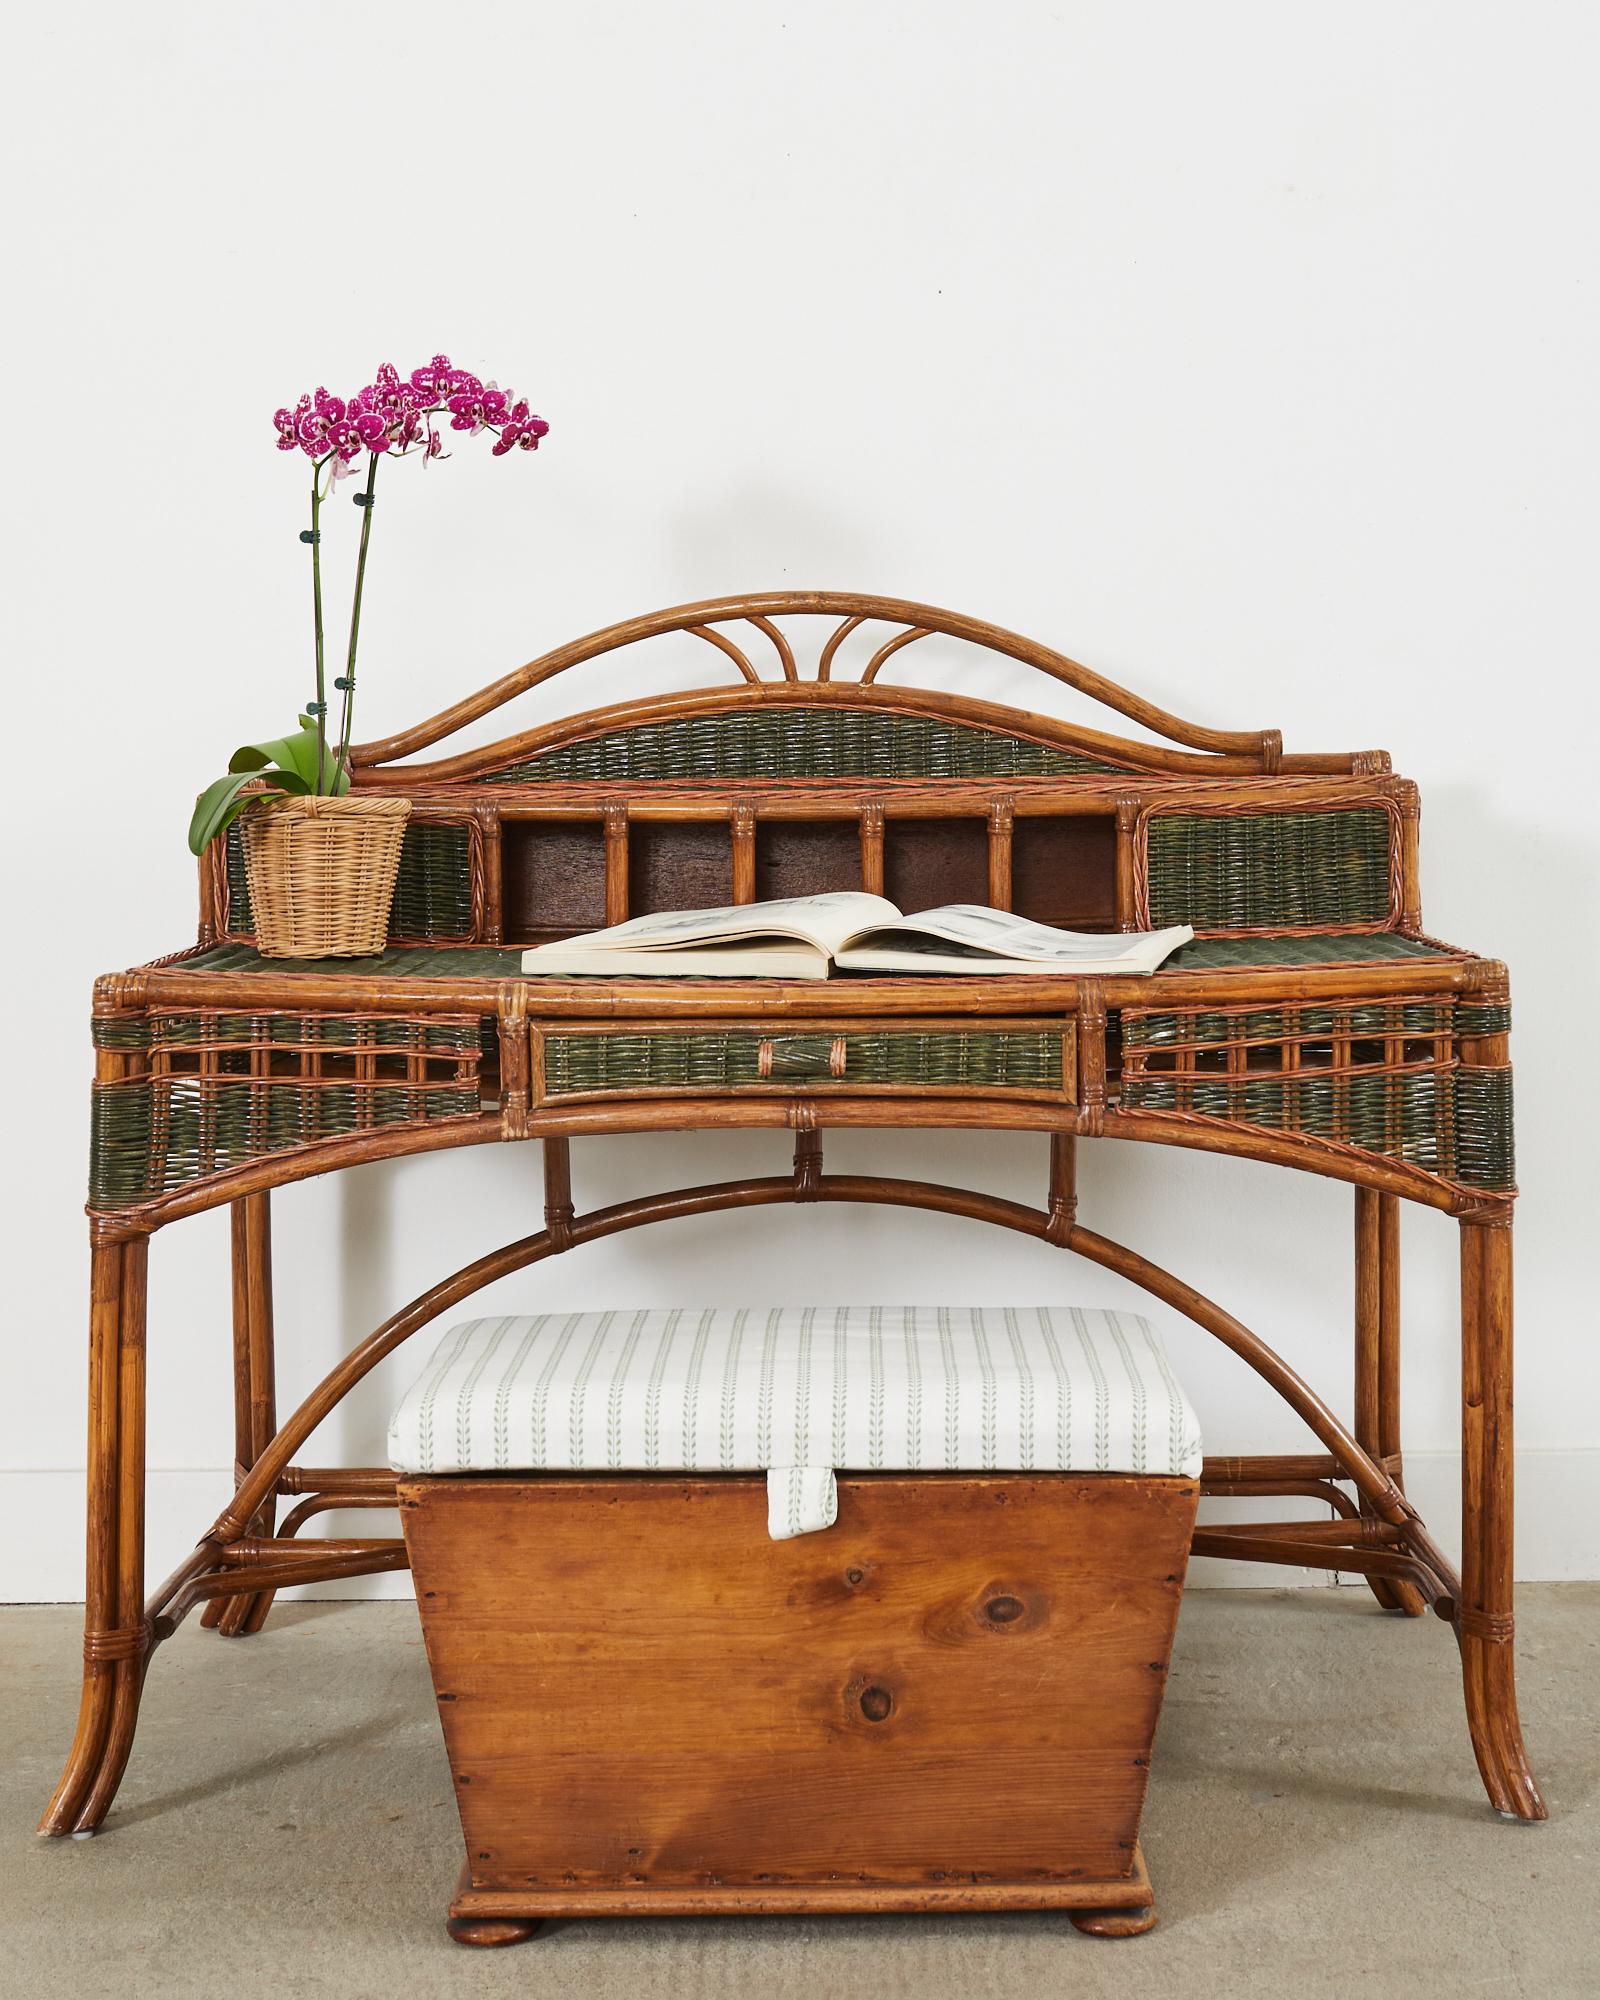 Amazing rattan and wicker writing table or desk attributed to Grange, France. The desk has a large rattan frame lashed together with rattan wicker peel laces. The writing surface measures 29 inches high and is completely covered in woven wicker